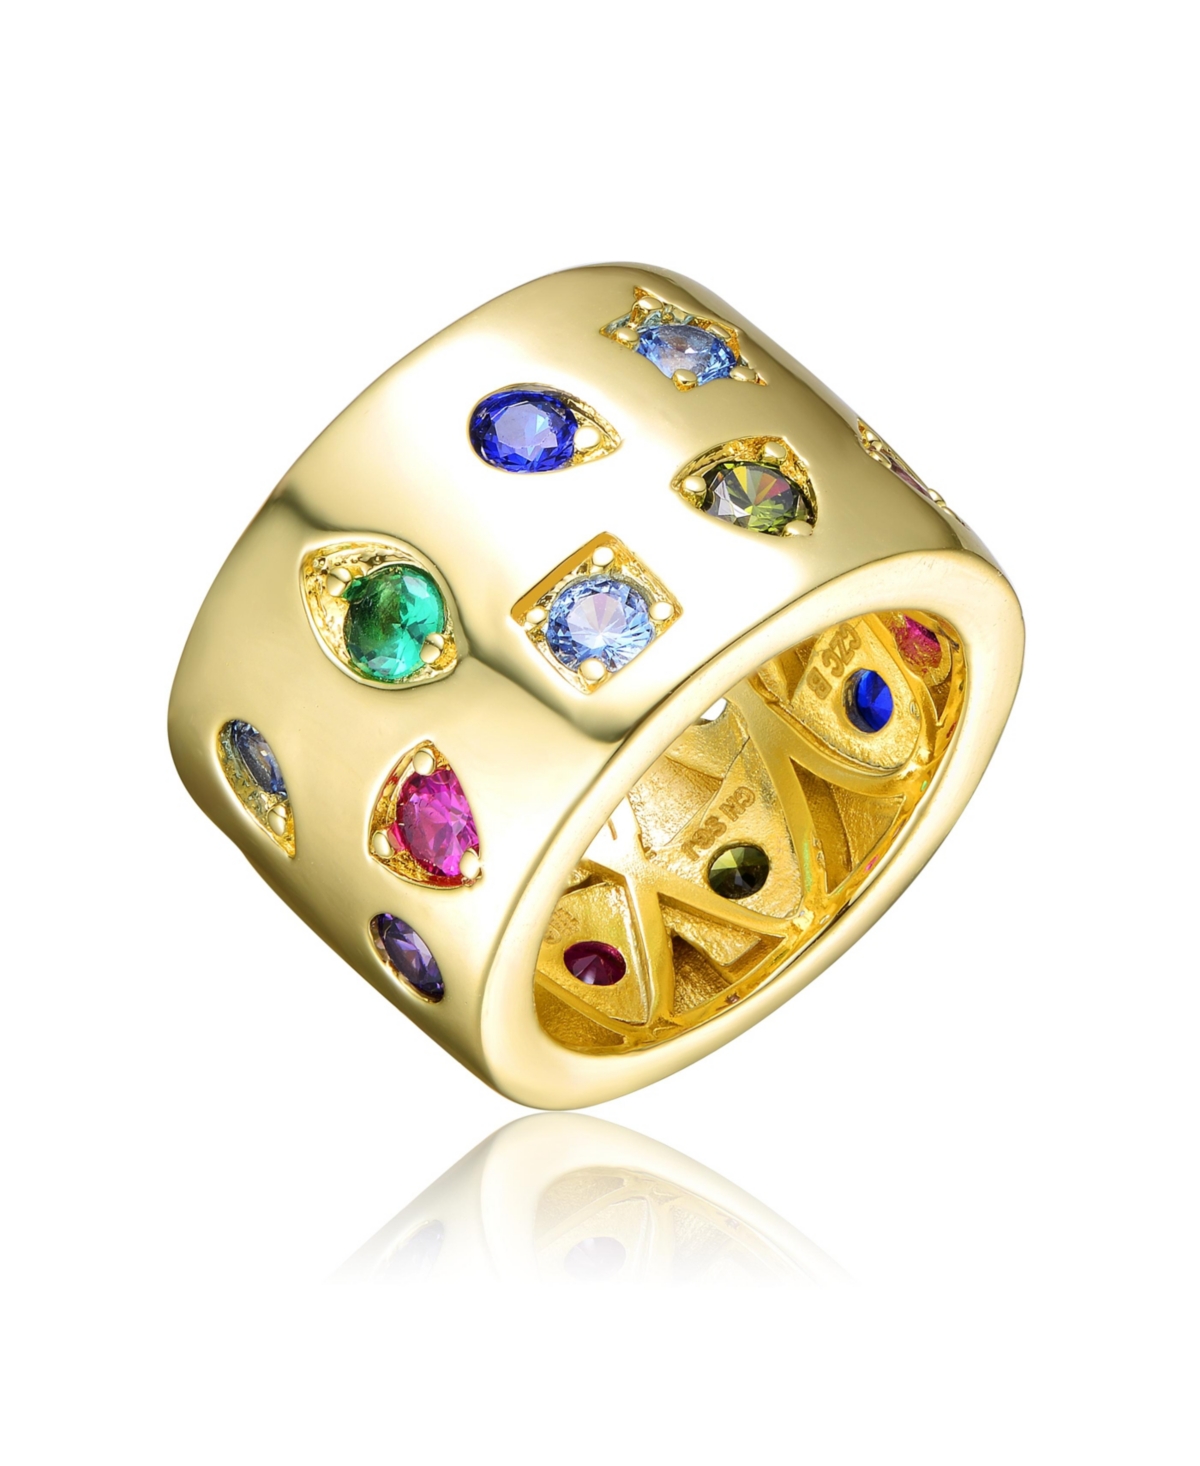 Radiant 14K Gold Plated Wide Band Ring with Spotted Multi-Colored Cubic Zirconia - Gold